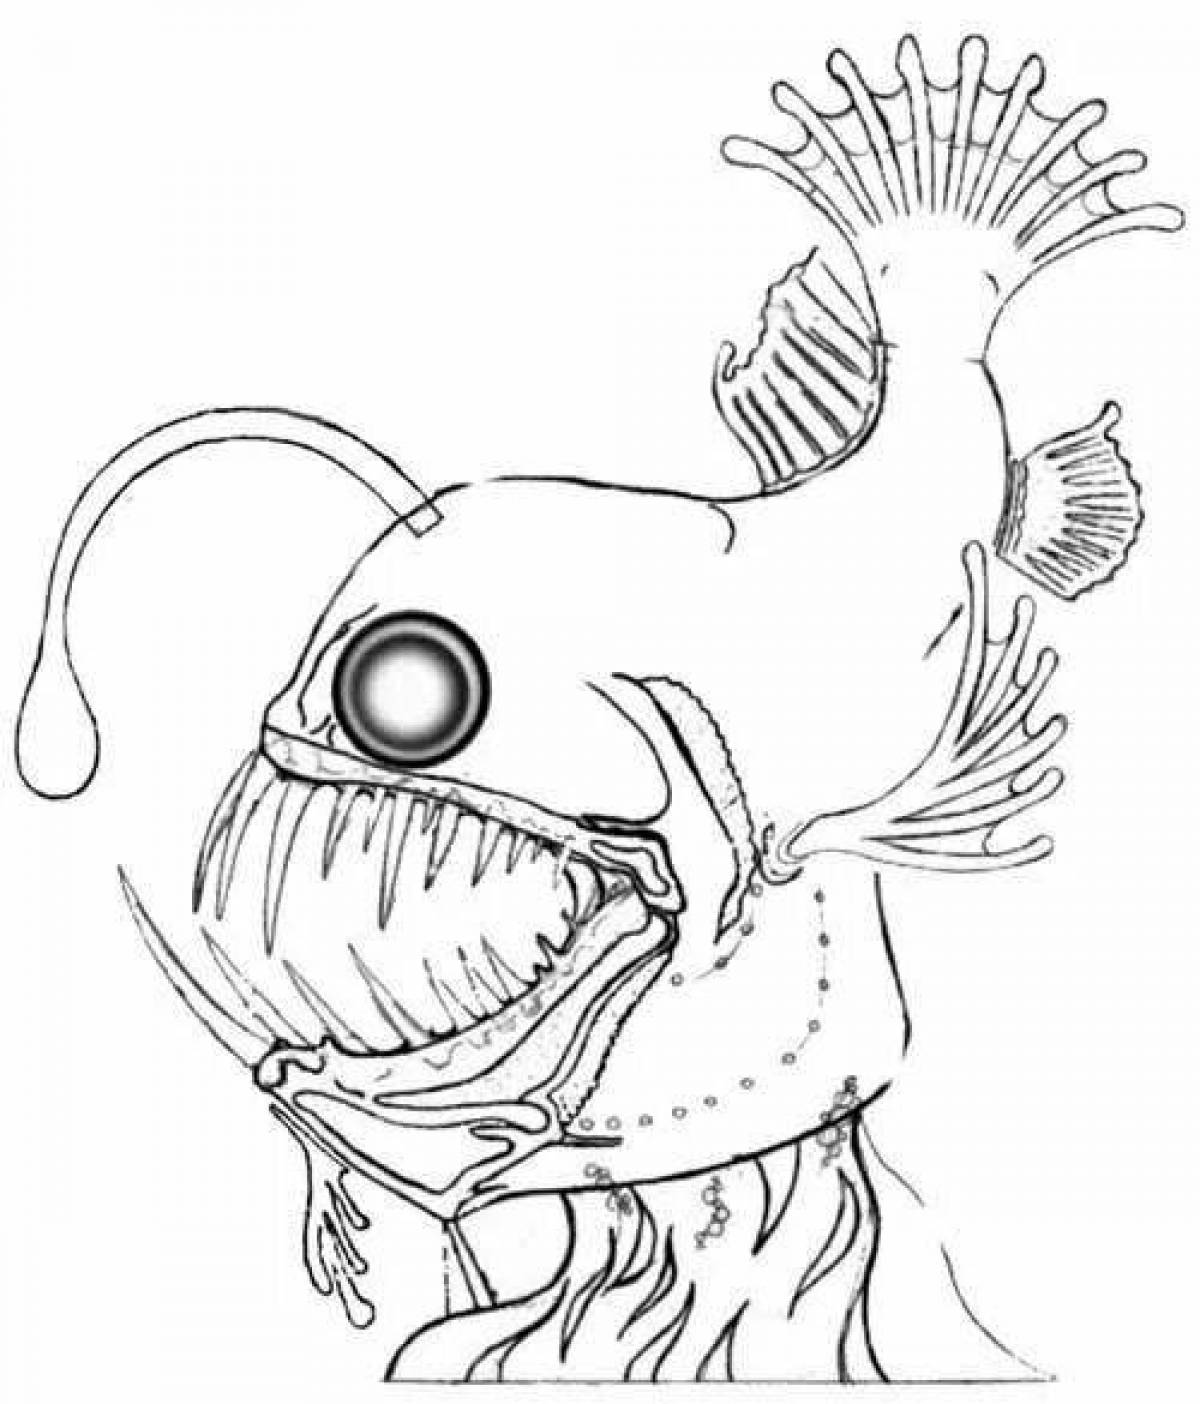 Attractive angler coloring page